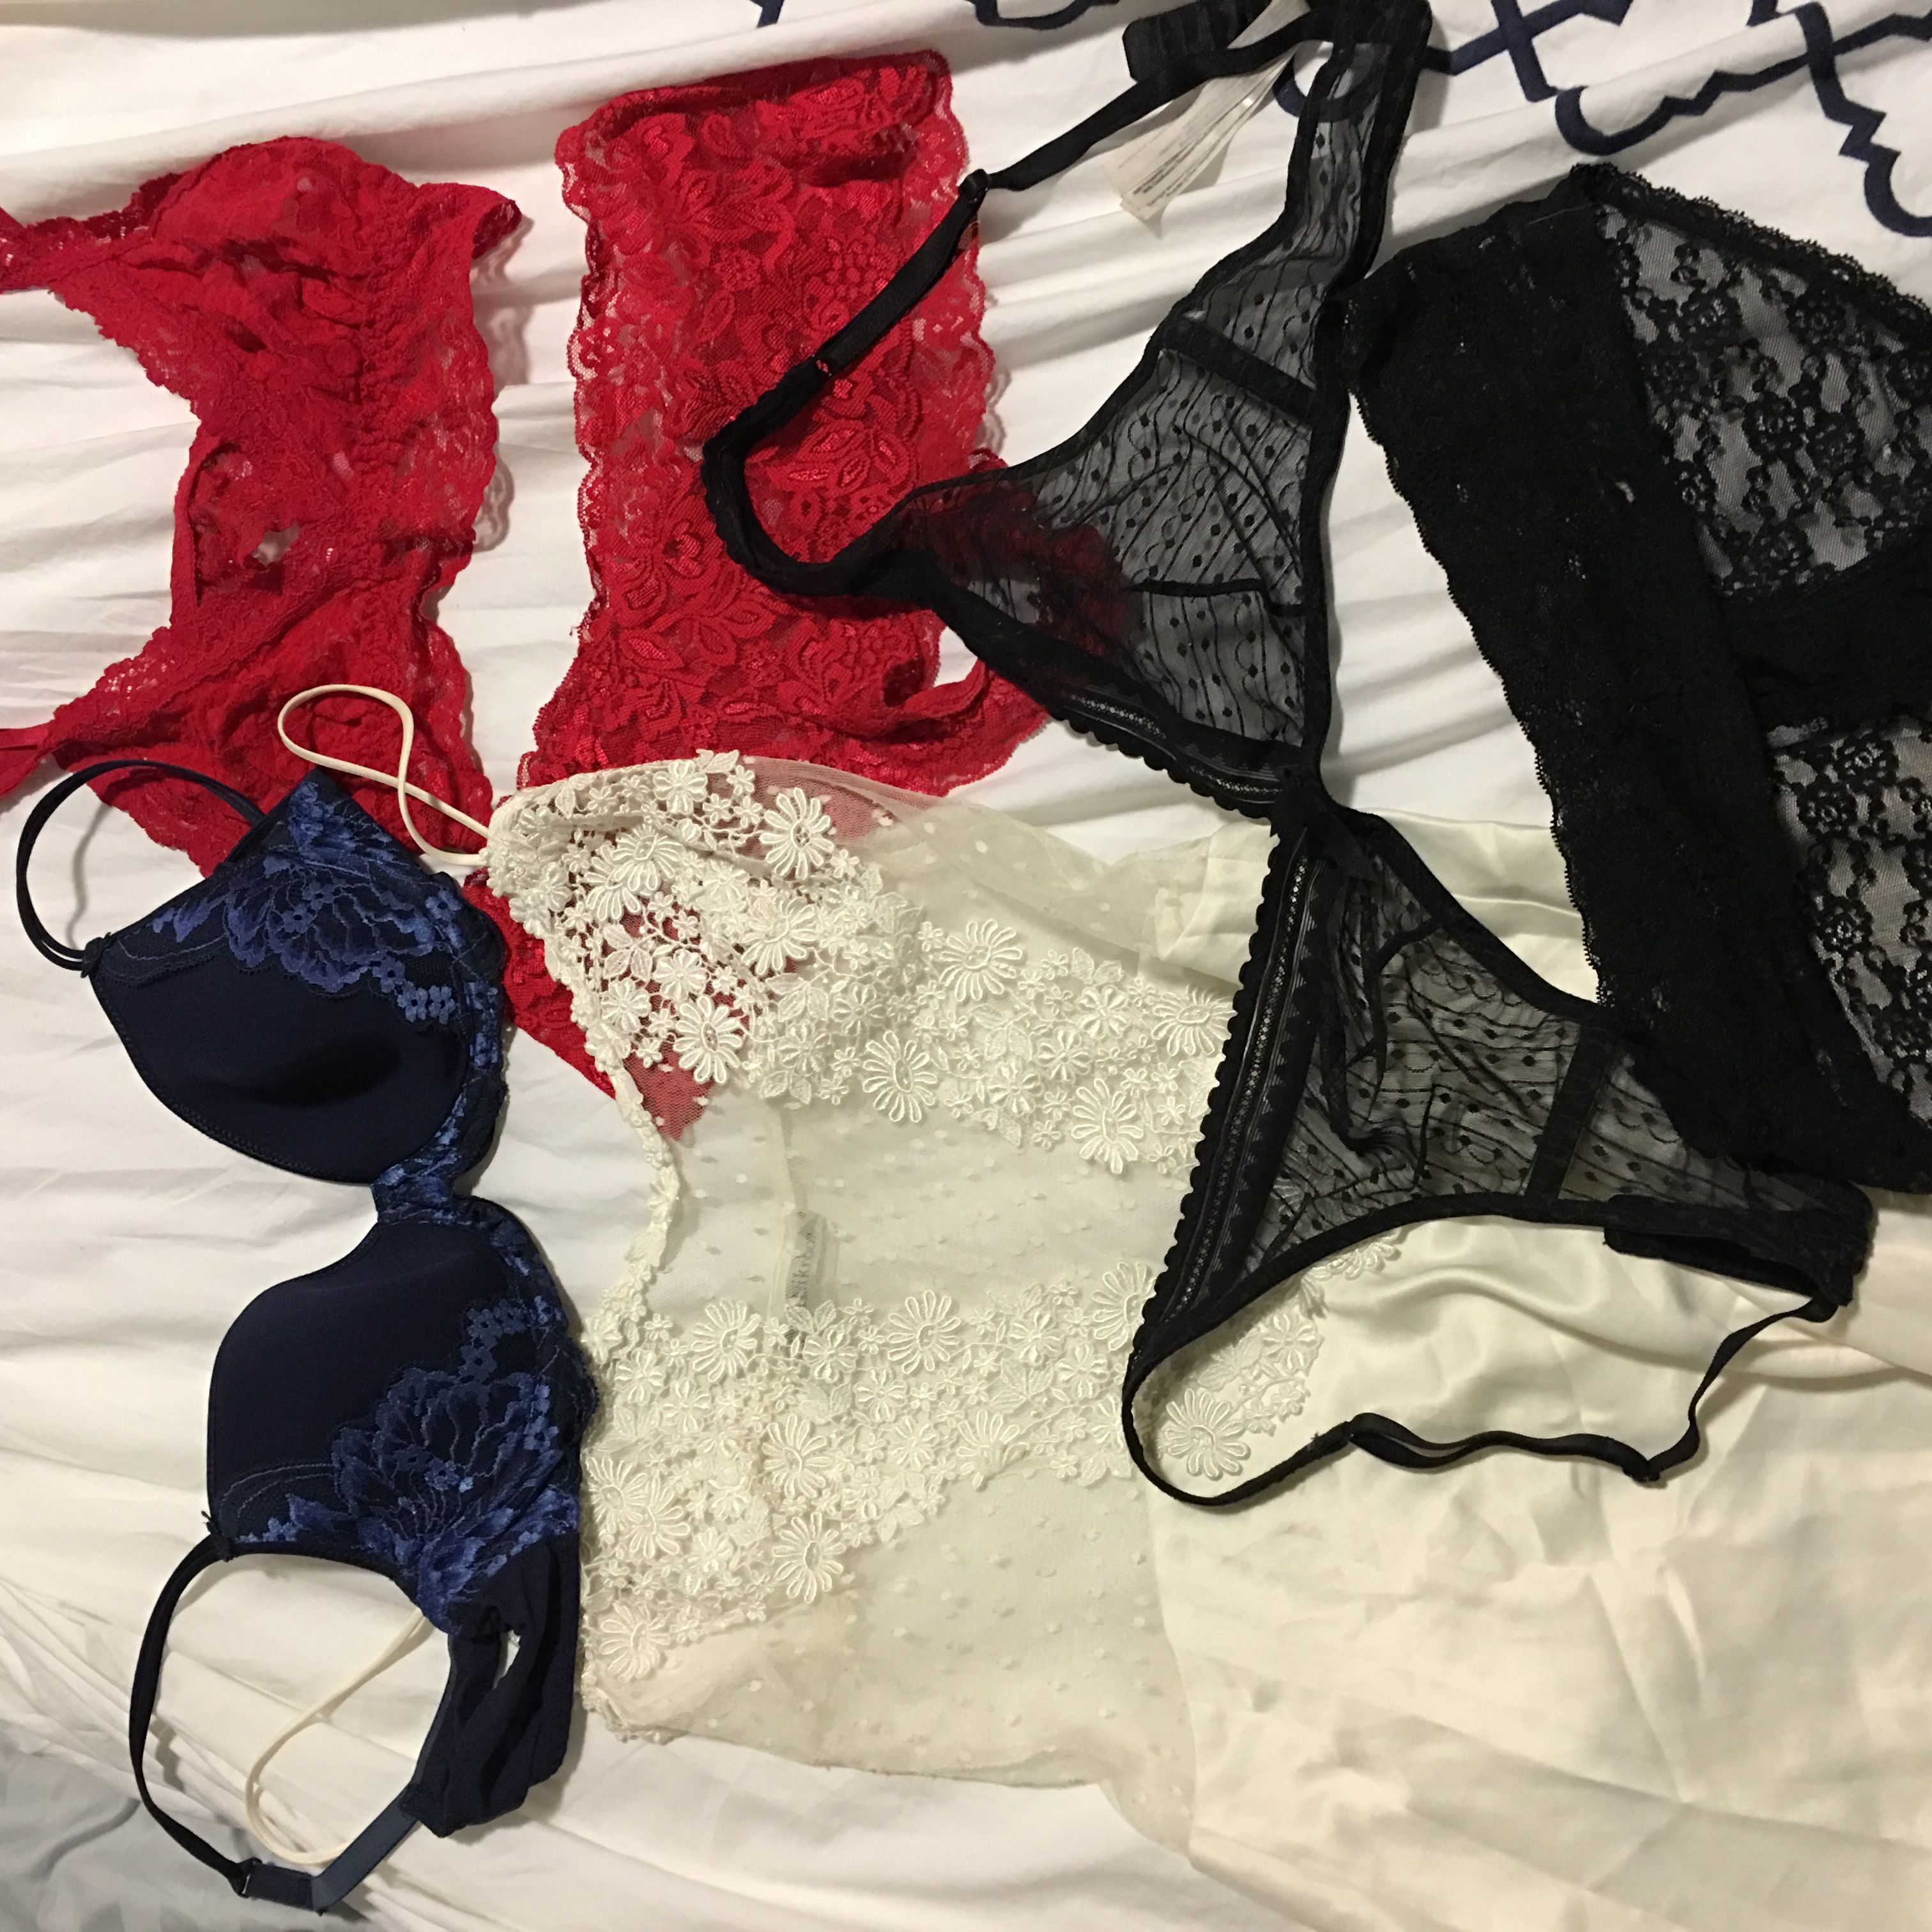 Why I Began My New Marriage With a Trip to a French Lingerie Store pic picture pic